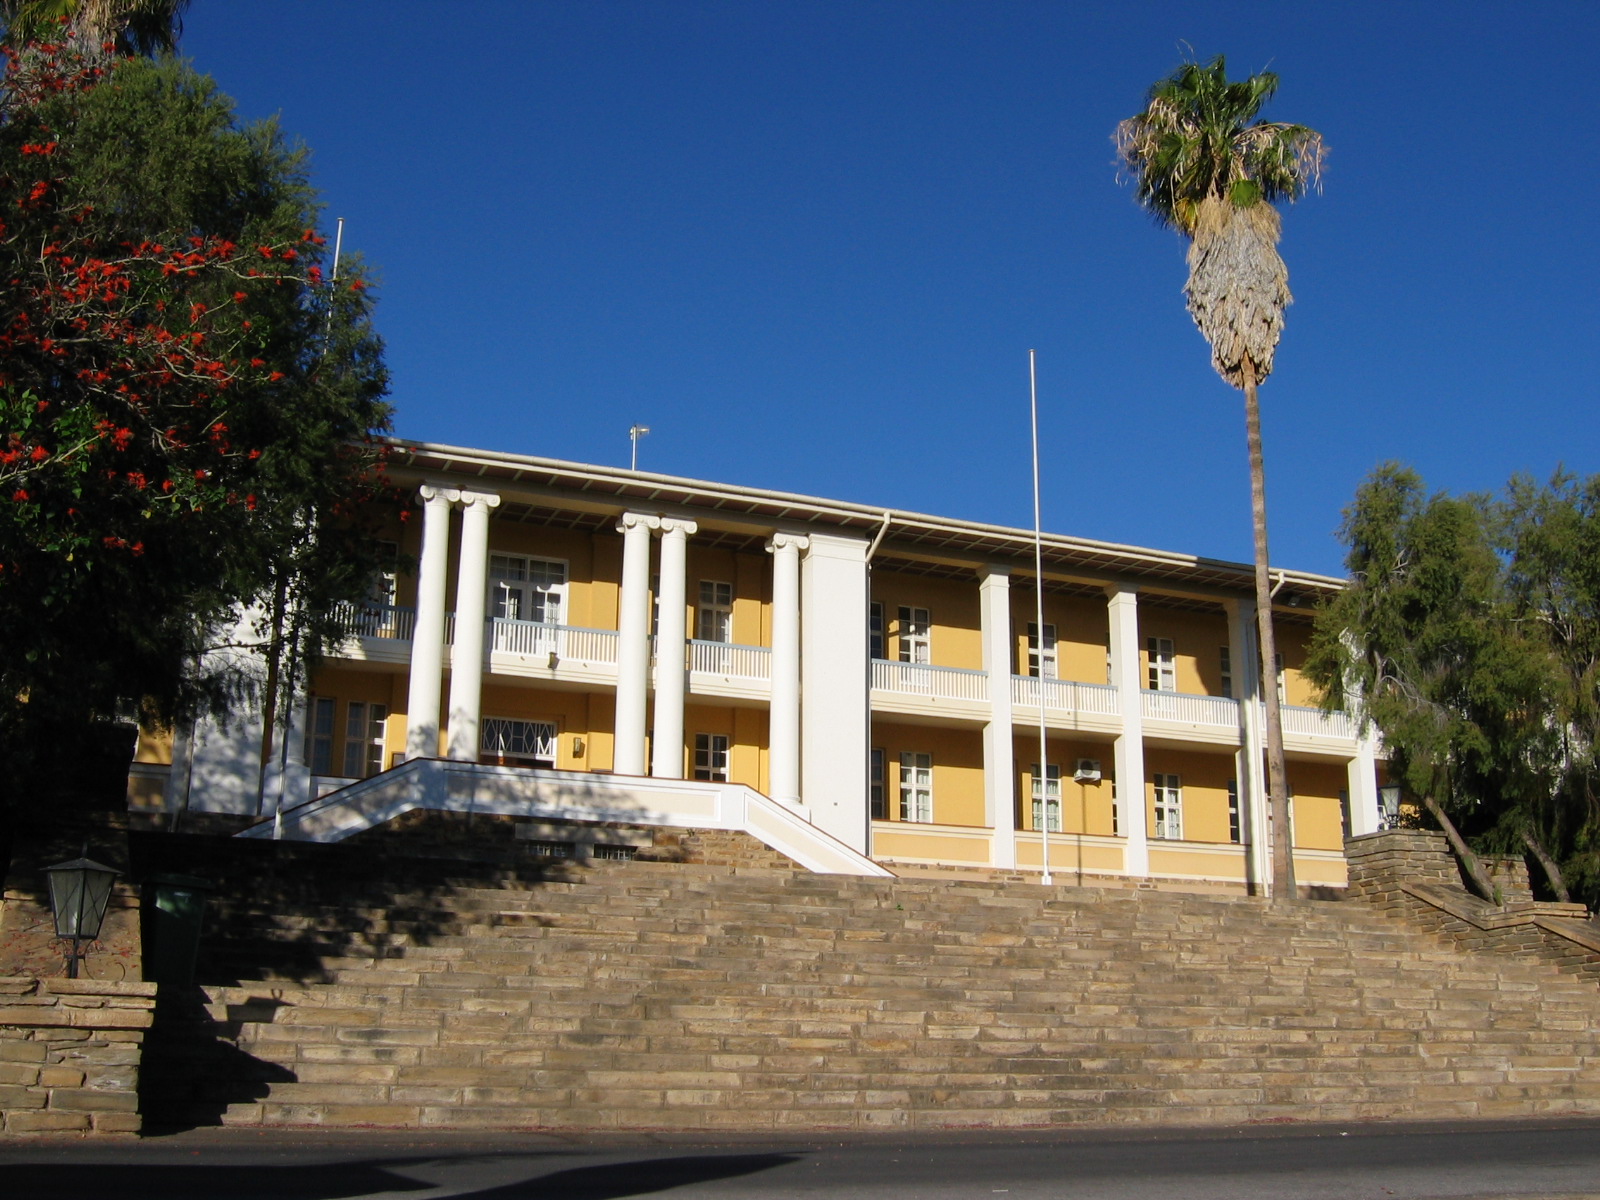 Parliament of Namibia